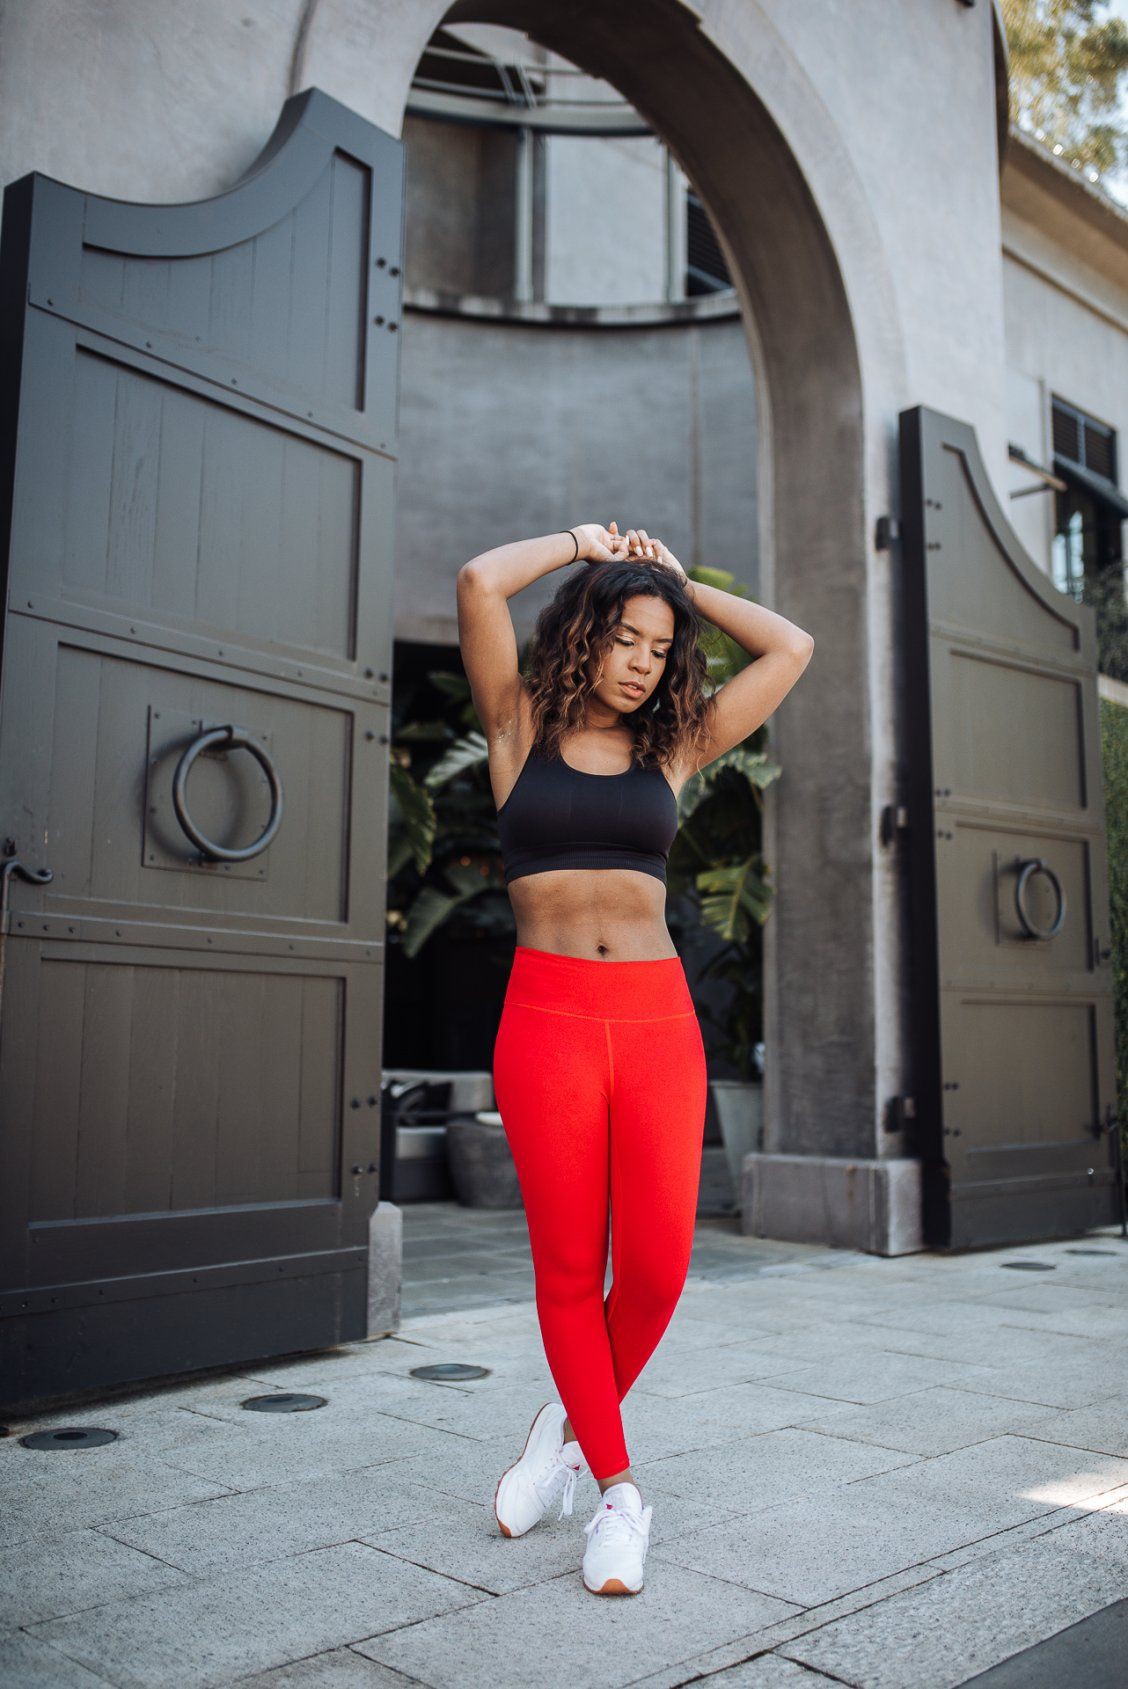 Red Yoga Femme | Red Legging Outfits | Outfit, Girls Legging Outfit, Leggings For Girls